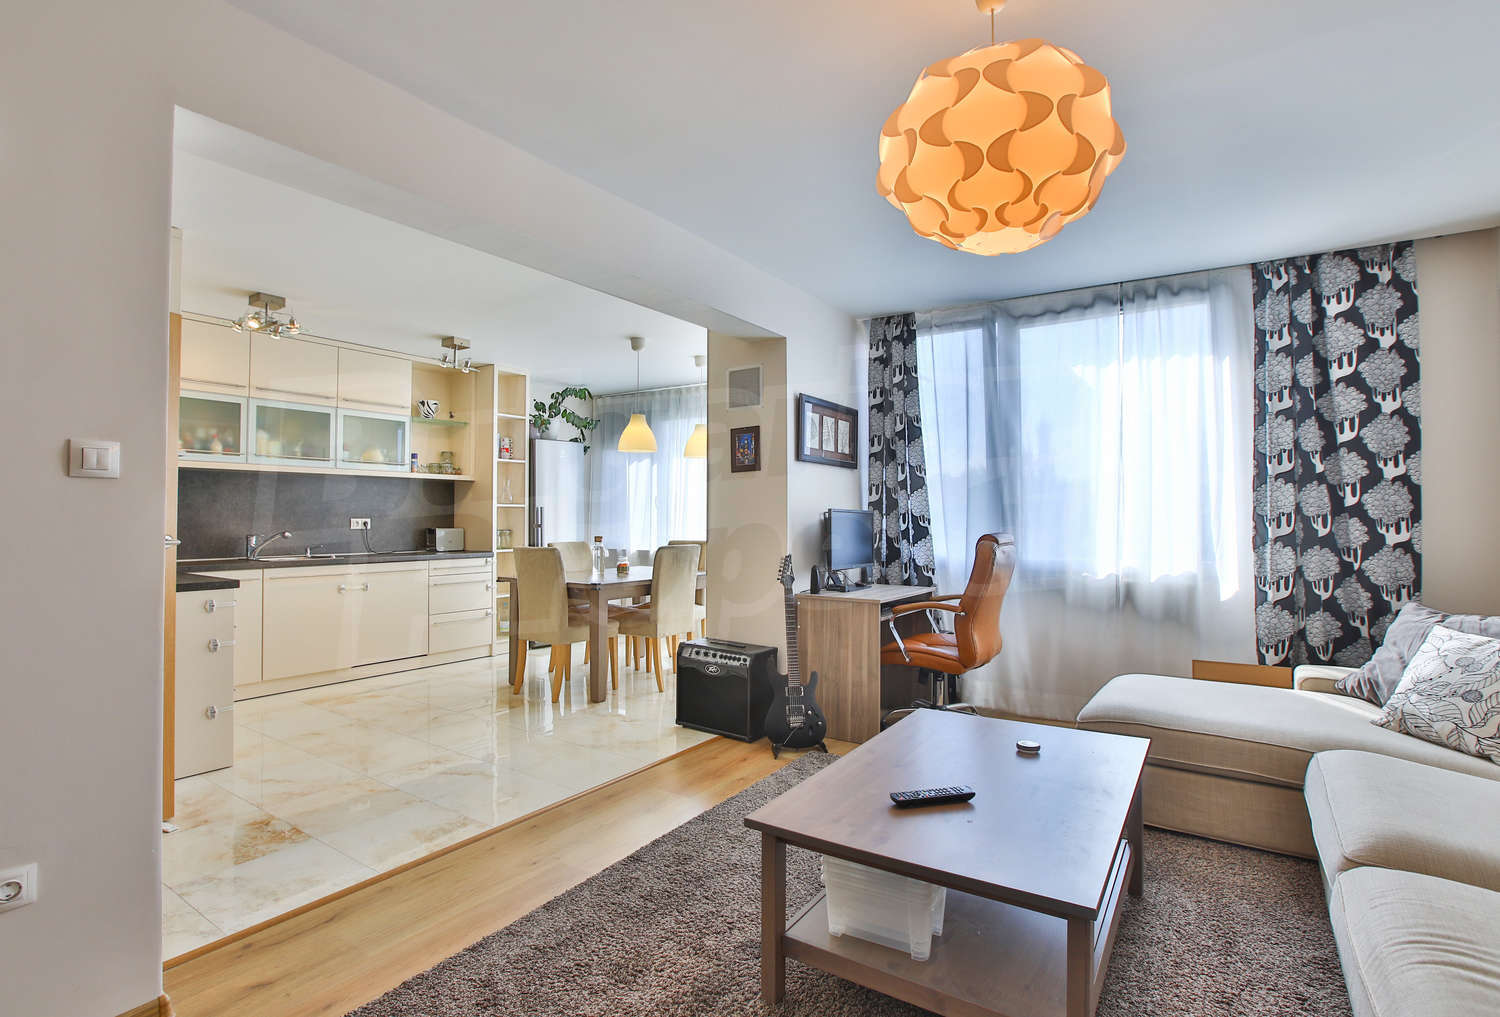 1-bedroom apartment for sale in Sofia, QuarterMladost 3, Bulgaria. Luxury  and stylish one-bedroom apartment in Mladost 3 quarter.